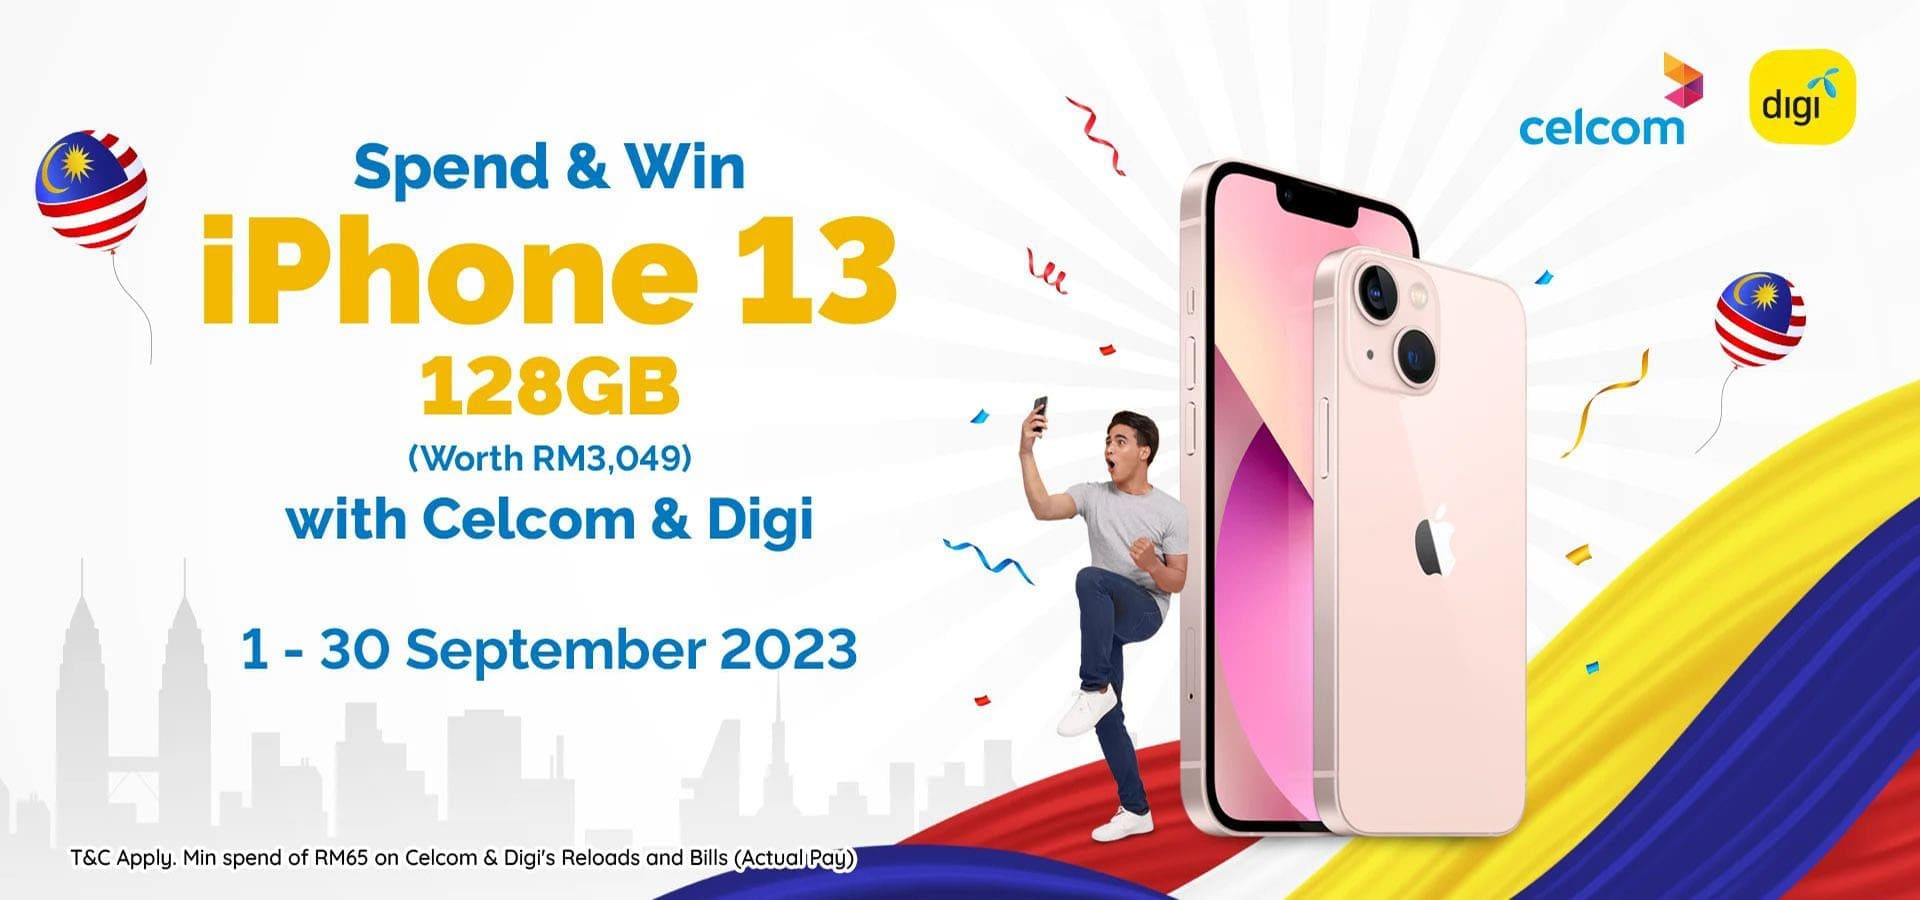 contest, iPhone, win iphone, Celcom, Digi, pay bill, bill payment, Malaysia Day, rewards.